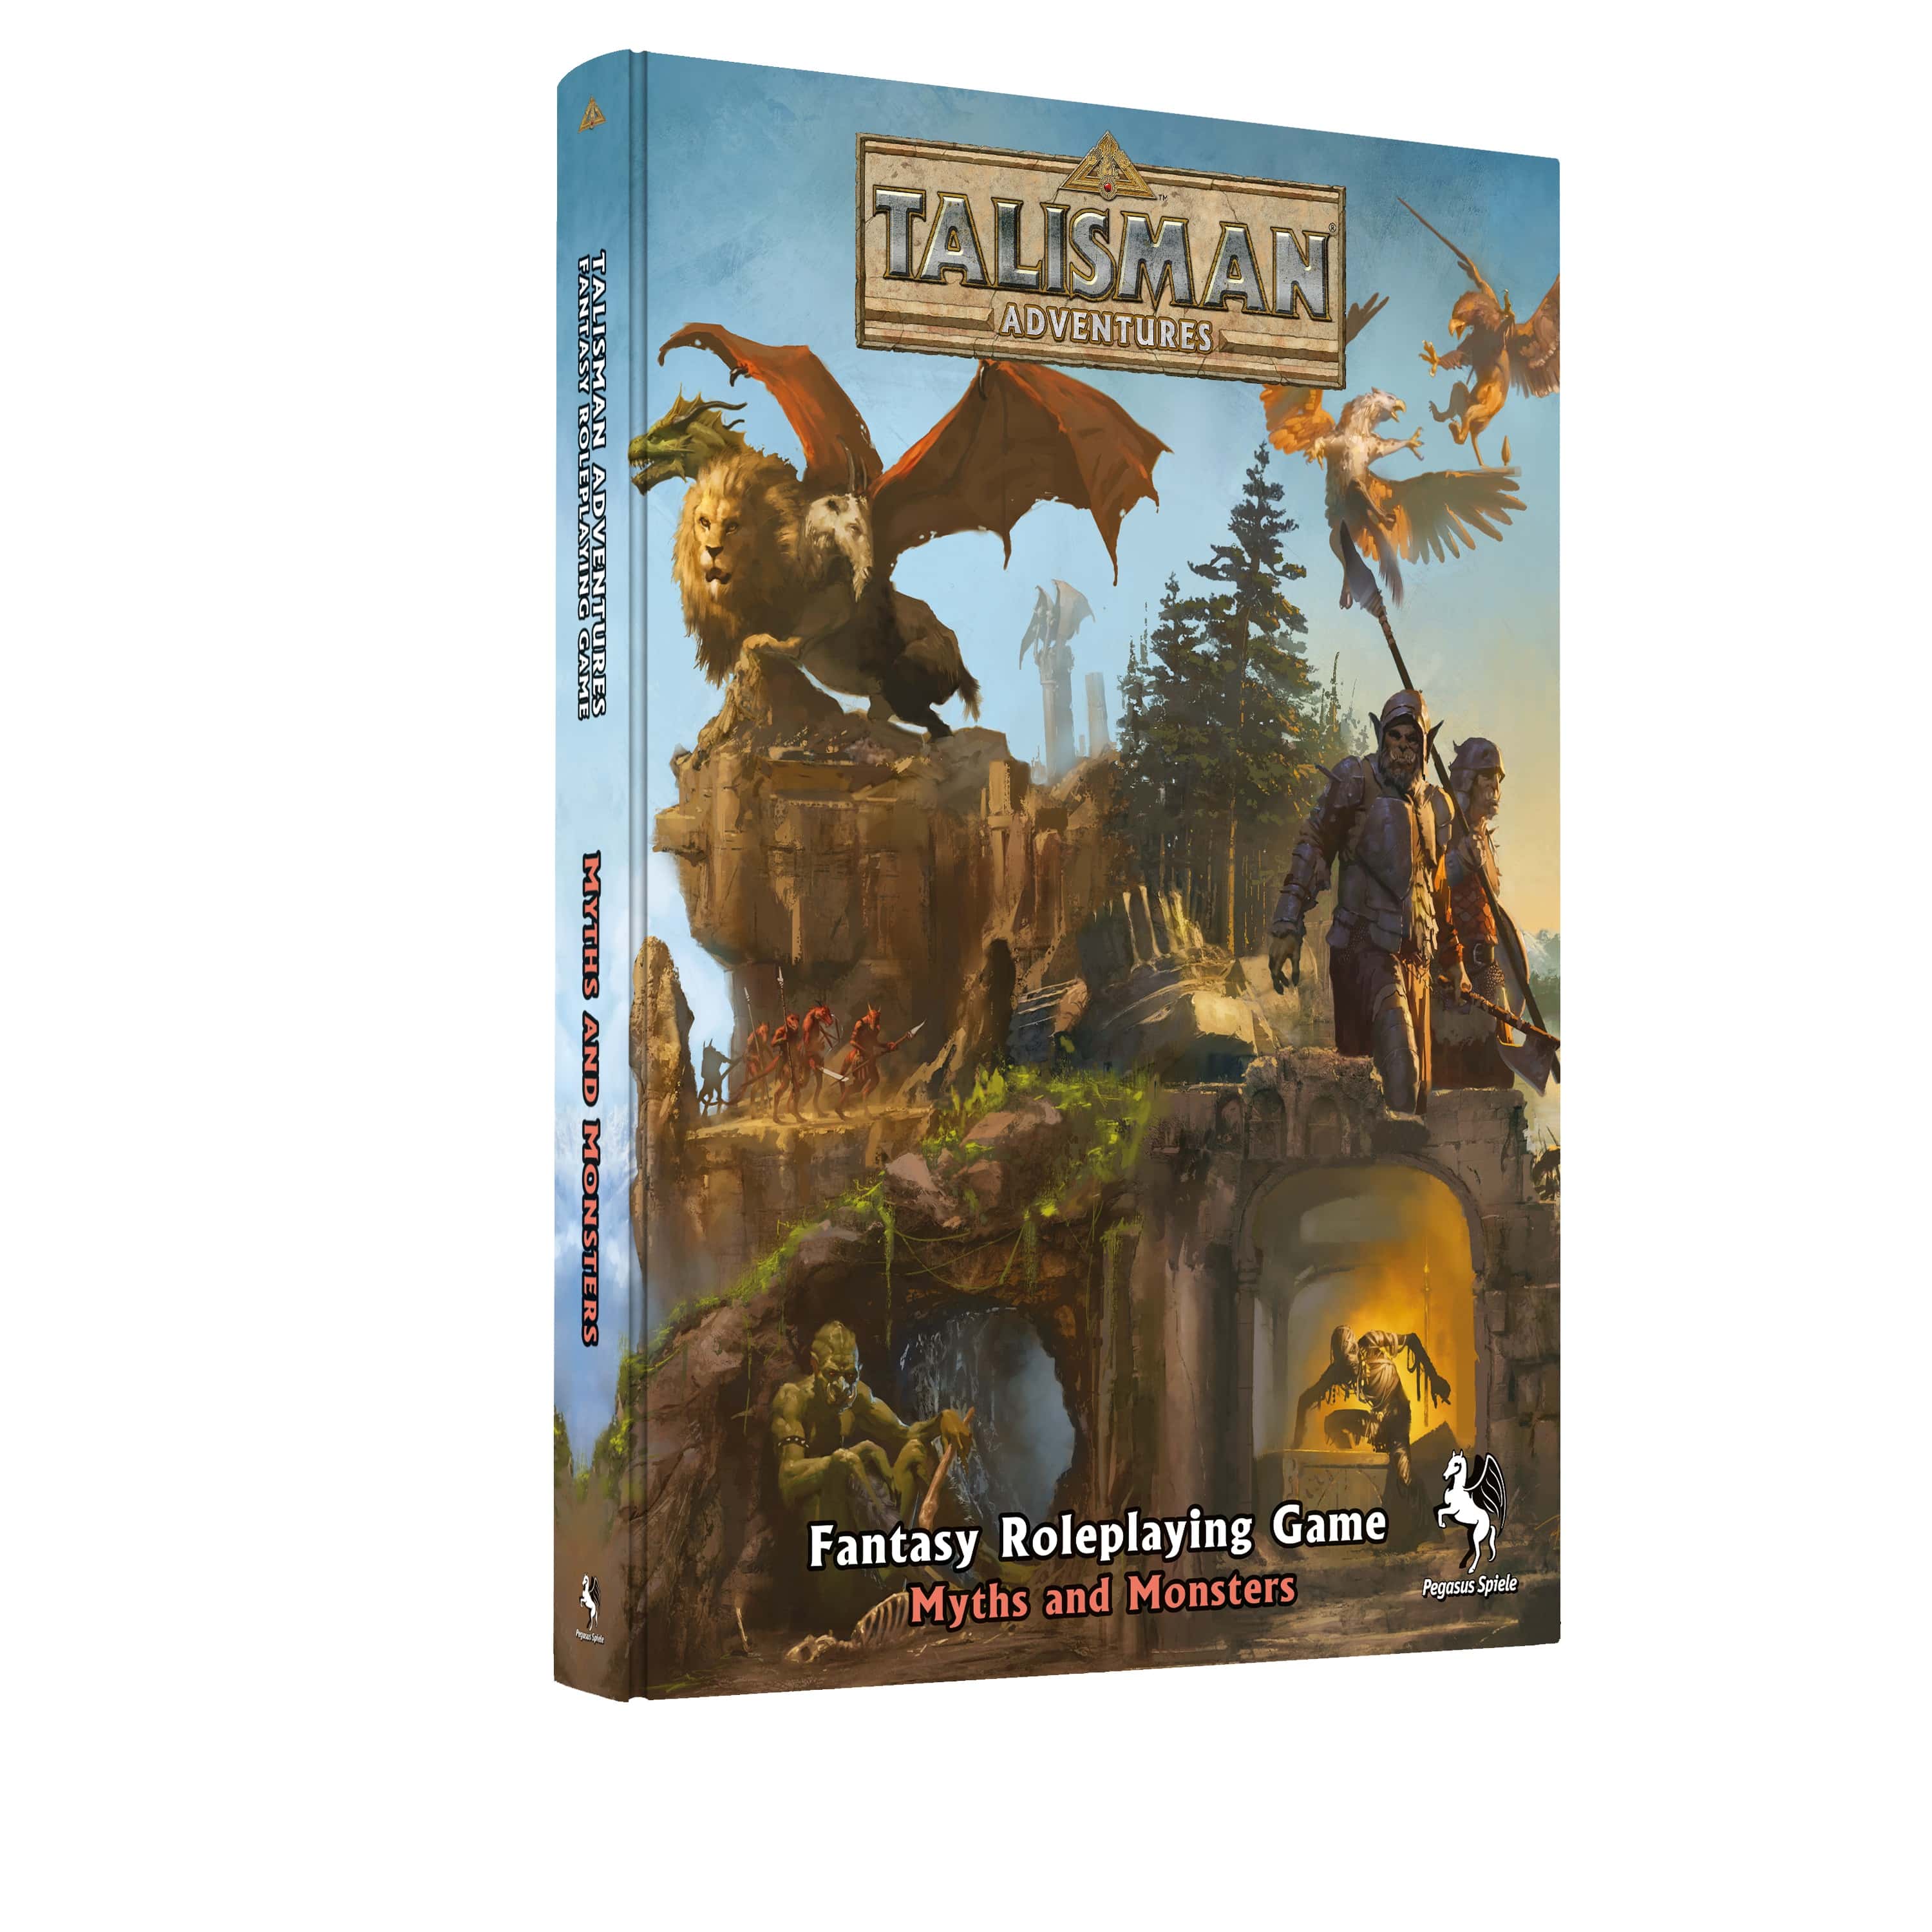 Talisman Adventures RPG – Myths and Monsters